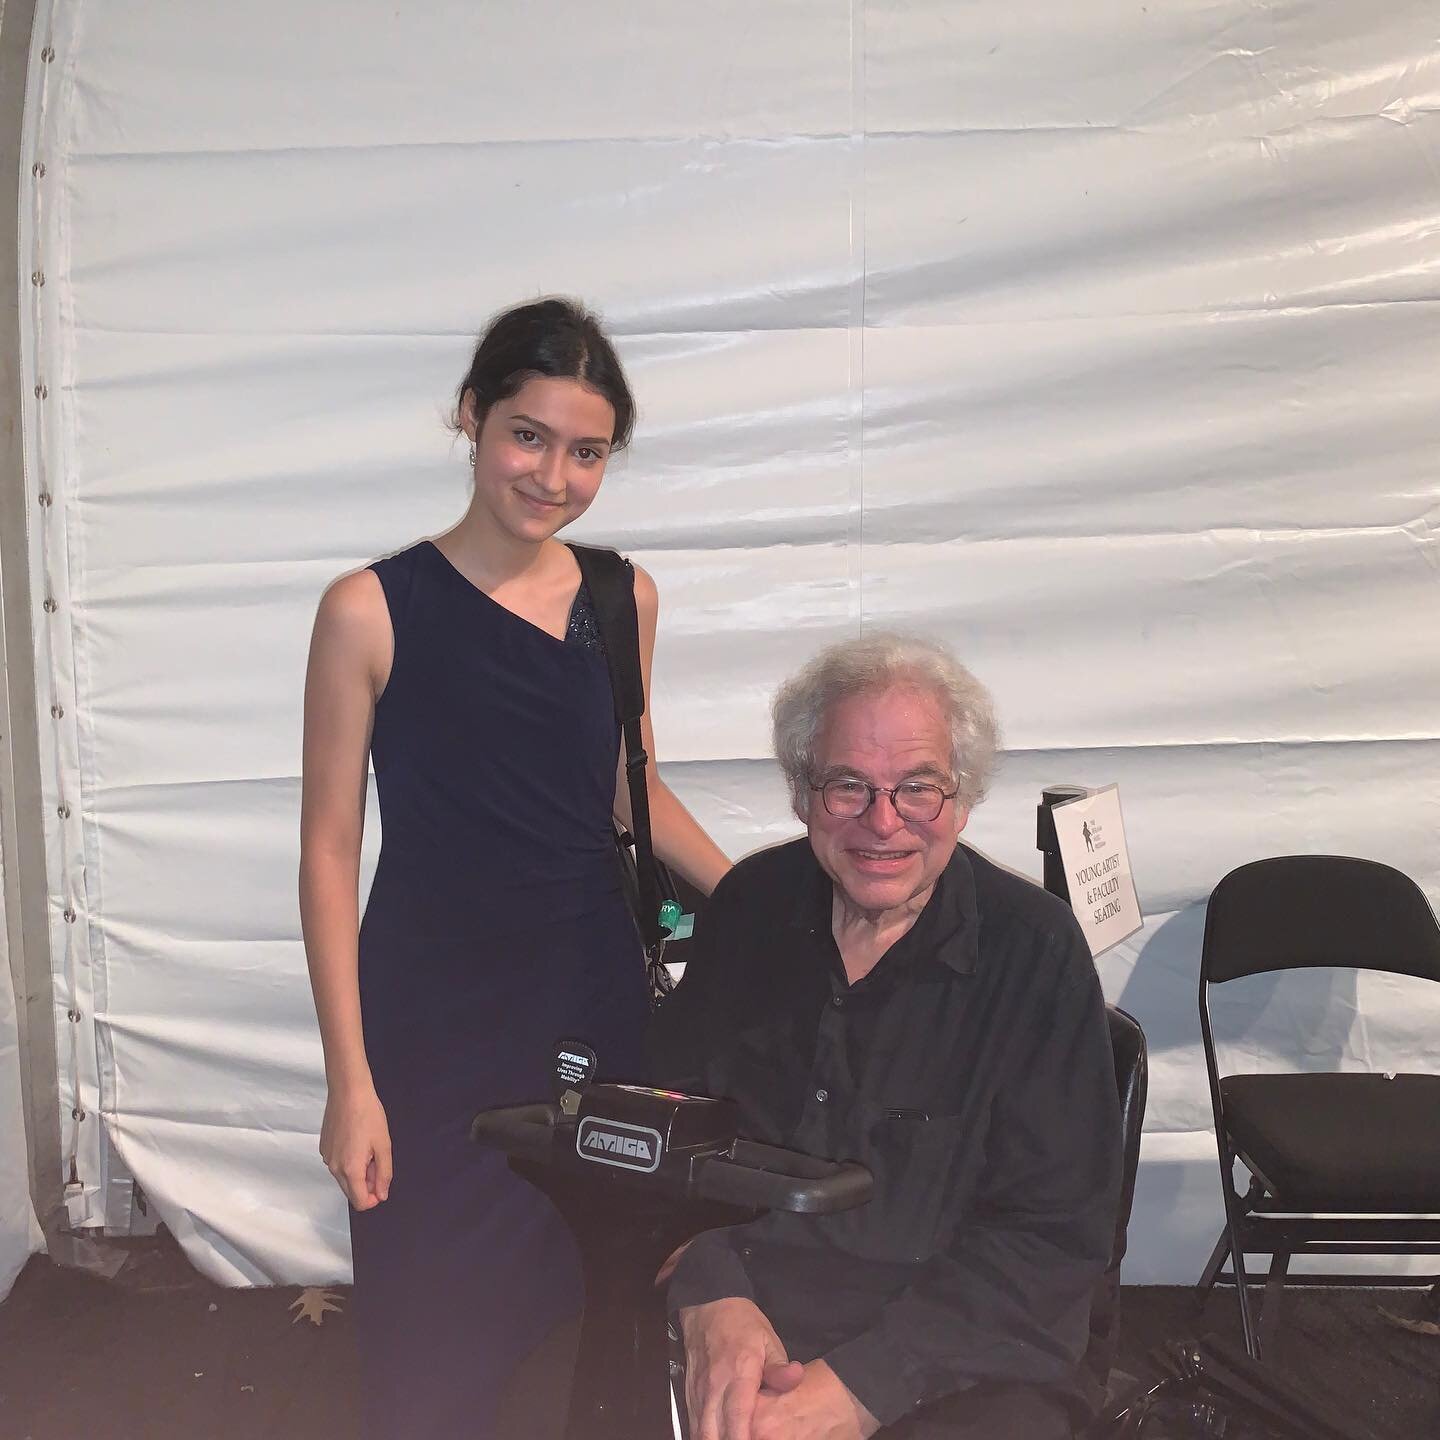 Enormous privilege to be present at The Perlman Music Program last night. While as a proud mom supporting Leah and her Brahms Quartet, the unexpected surprise was being rewarded by Mr. P&rsquo;s generosity to step in last minute for a sick student pe